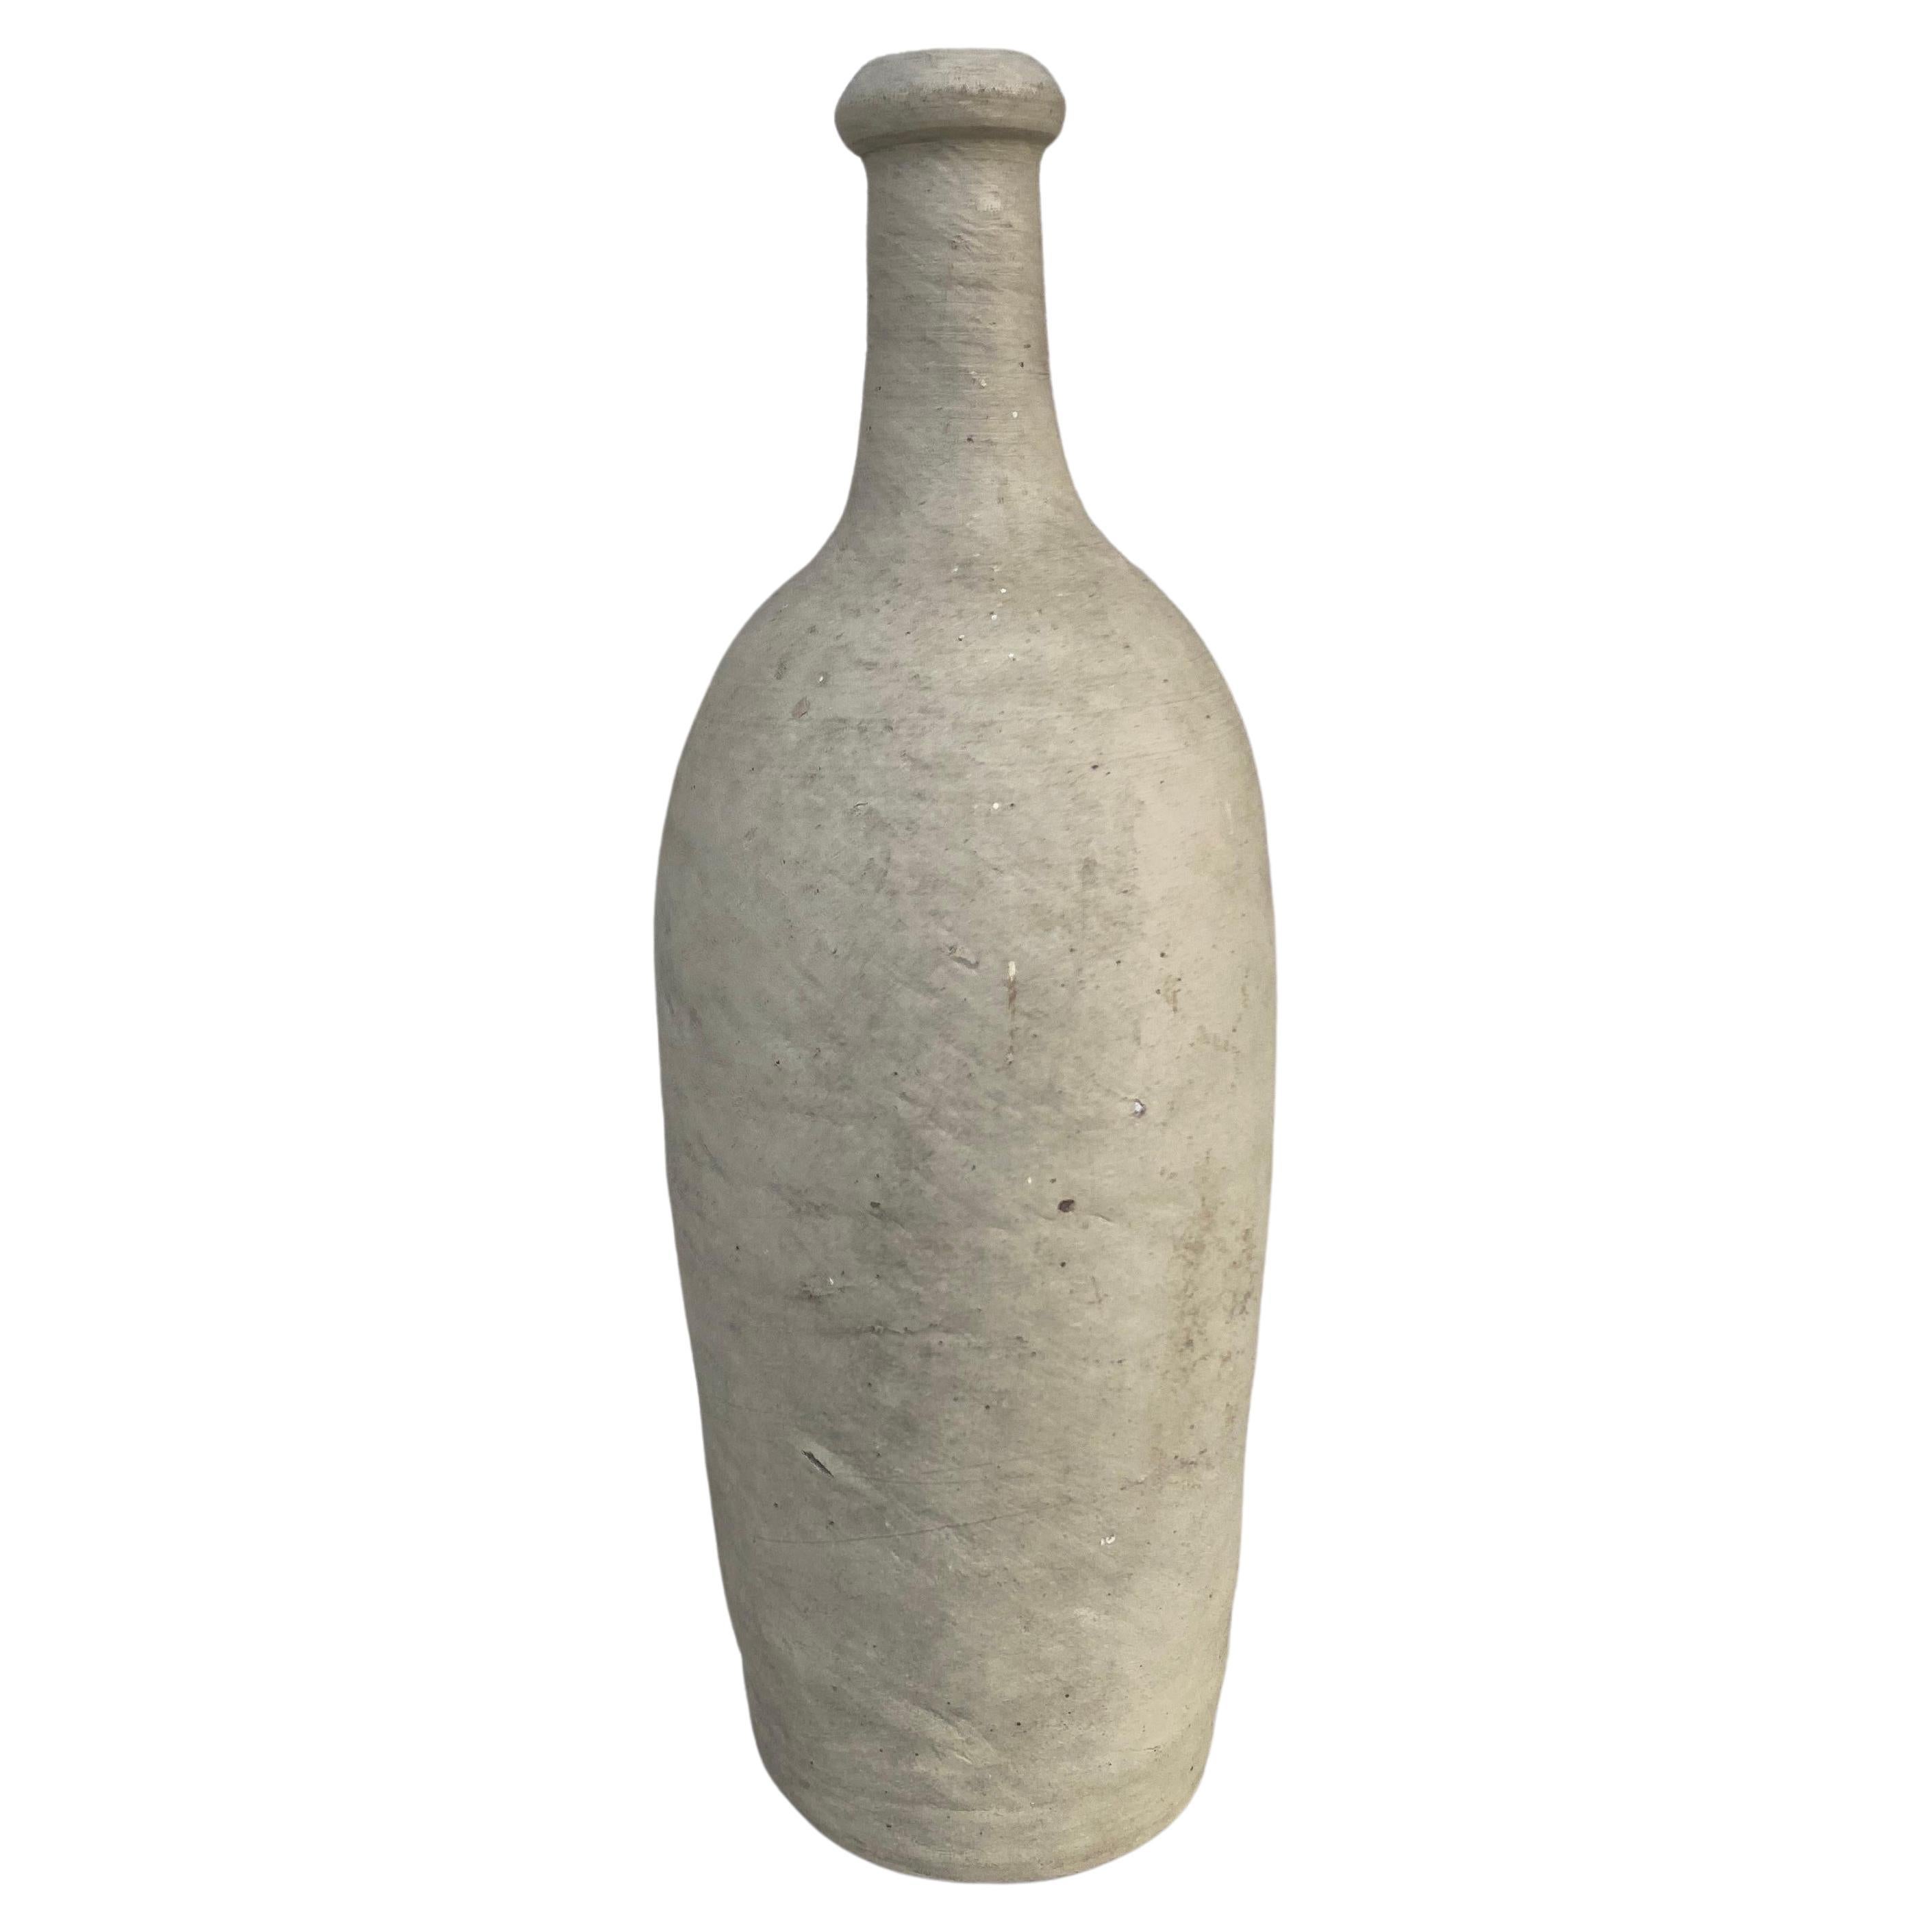 19th Century French Pottery Cider Bottle from Normandy